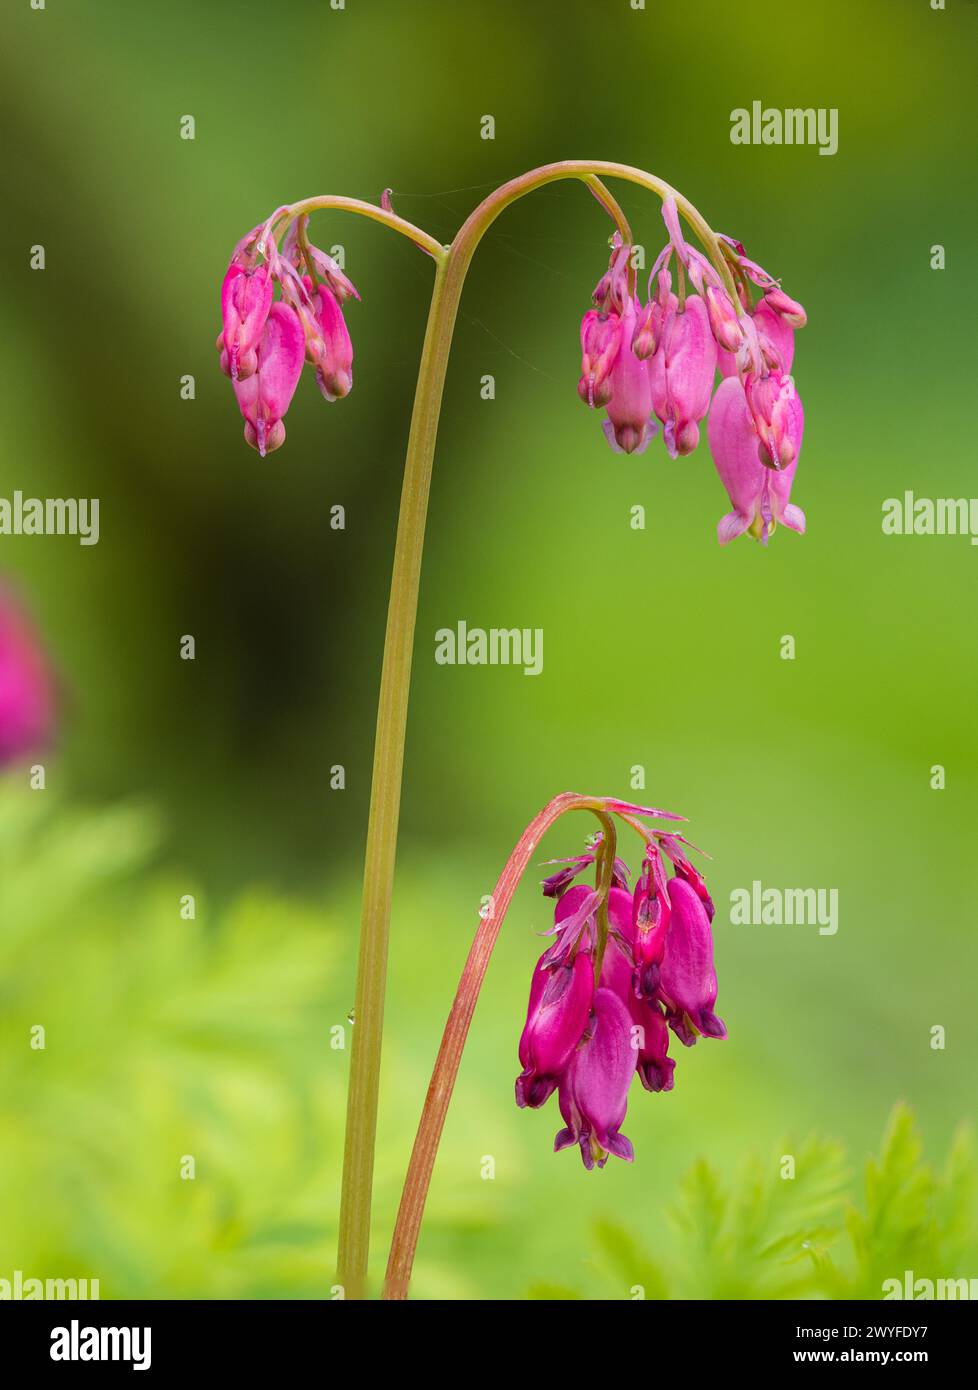 Arching stems and pink flowers of the hardy perennial spring flowering woodlander, Dicentra formosa Stock Photo